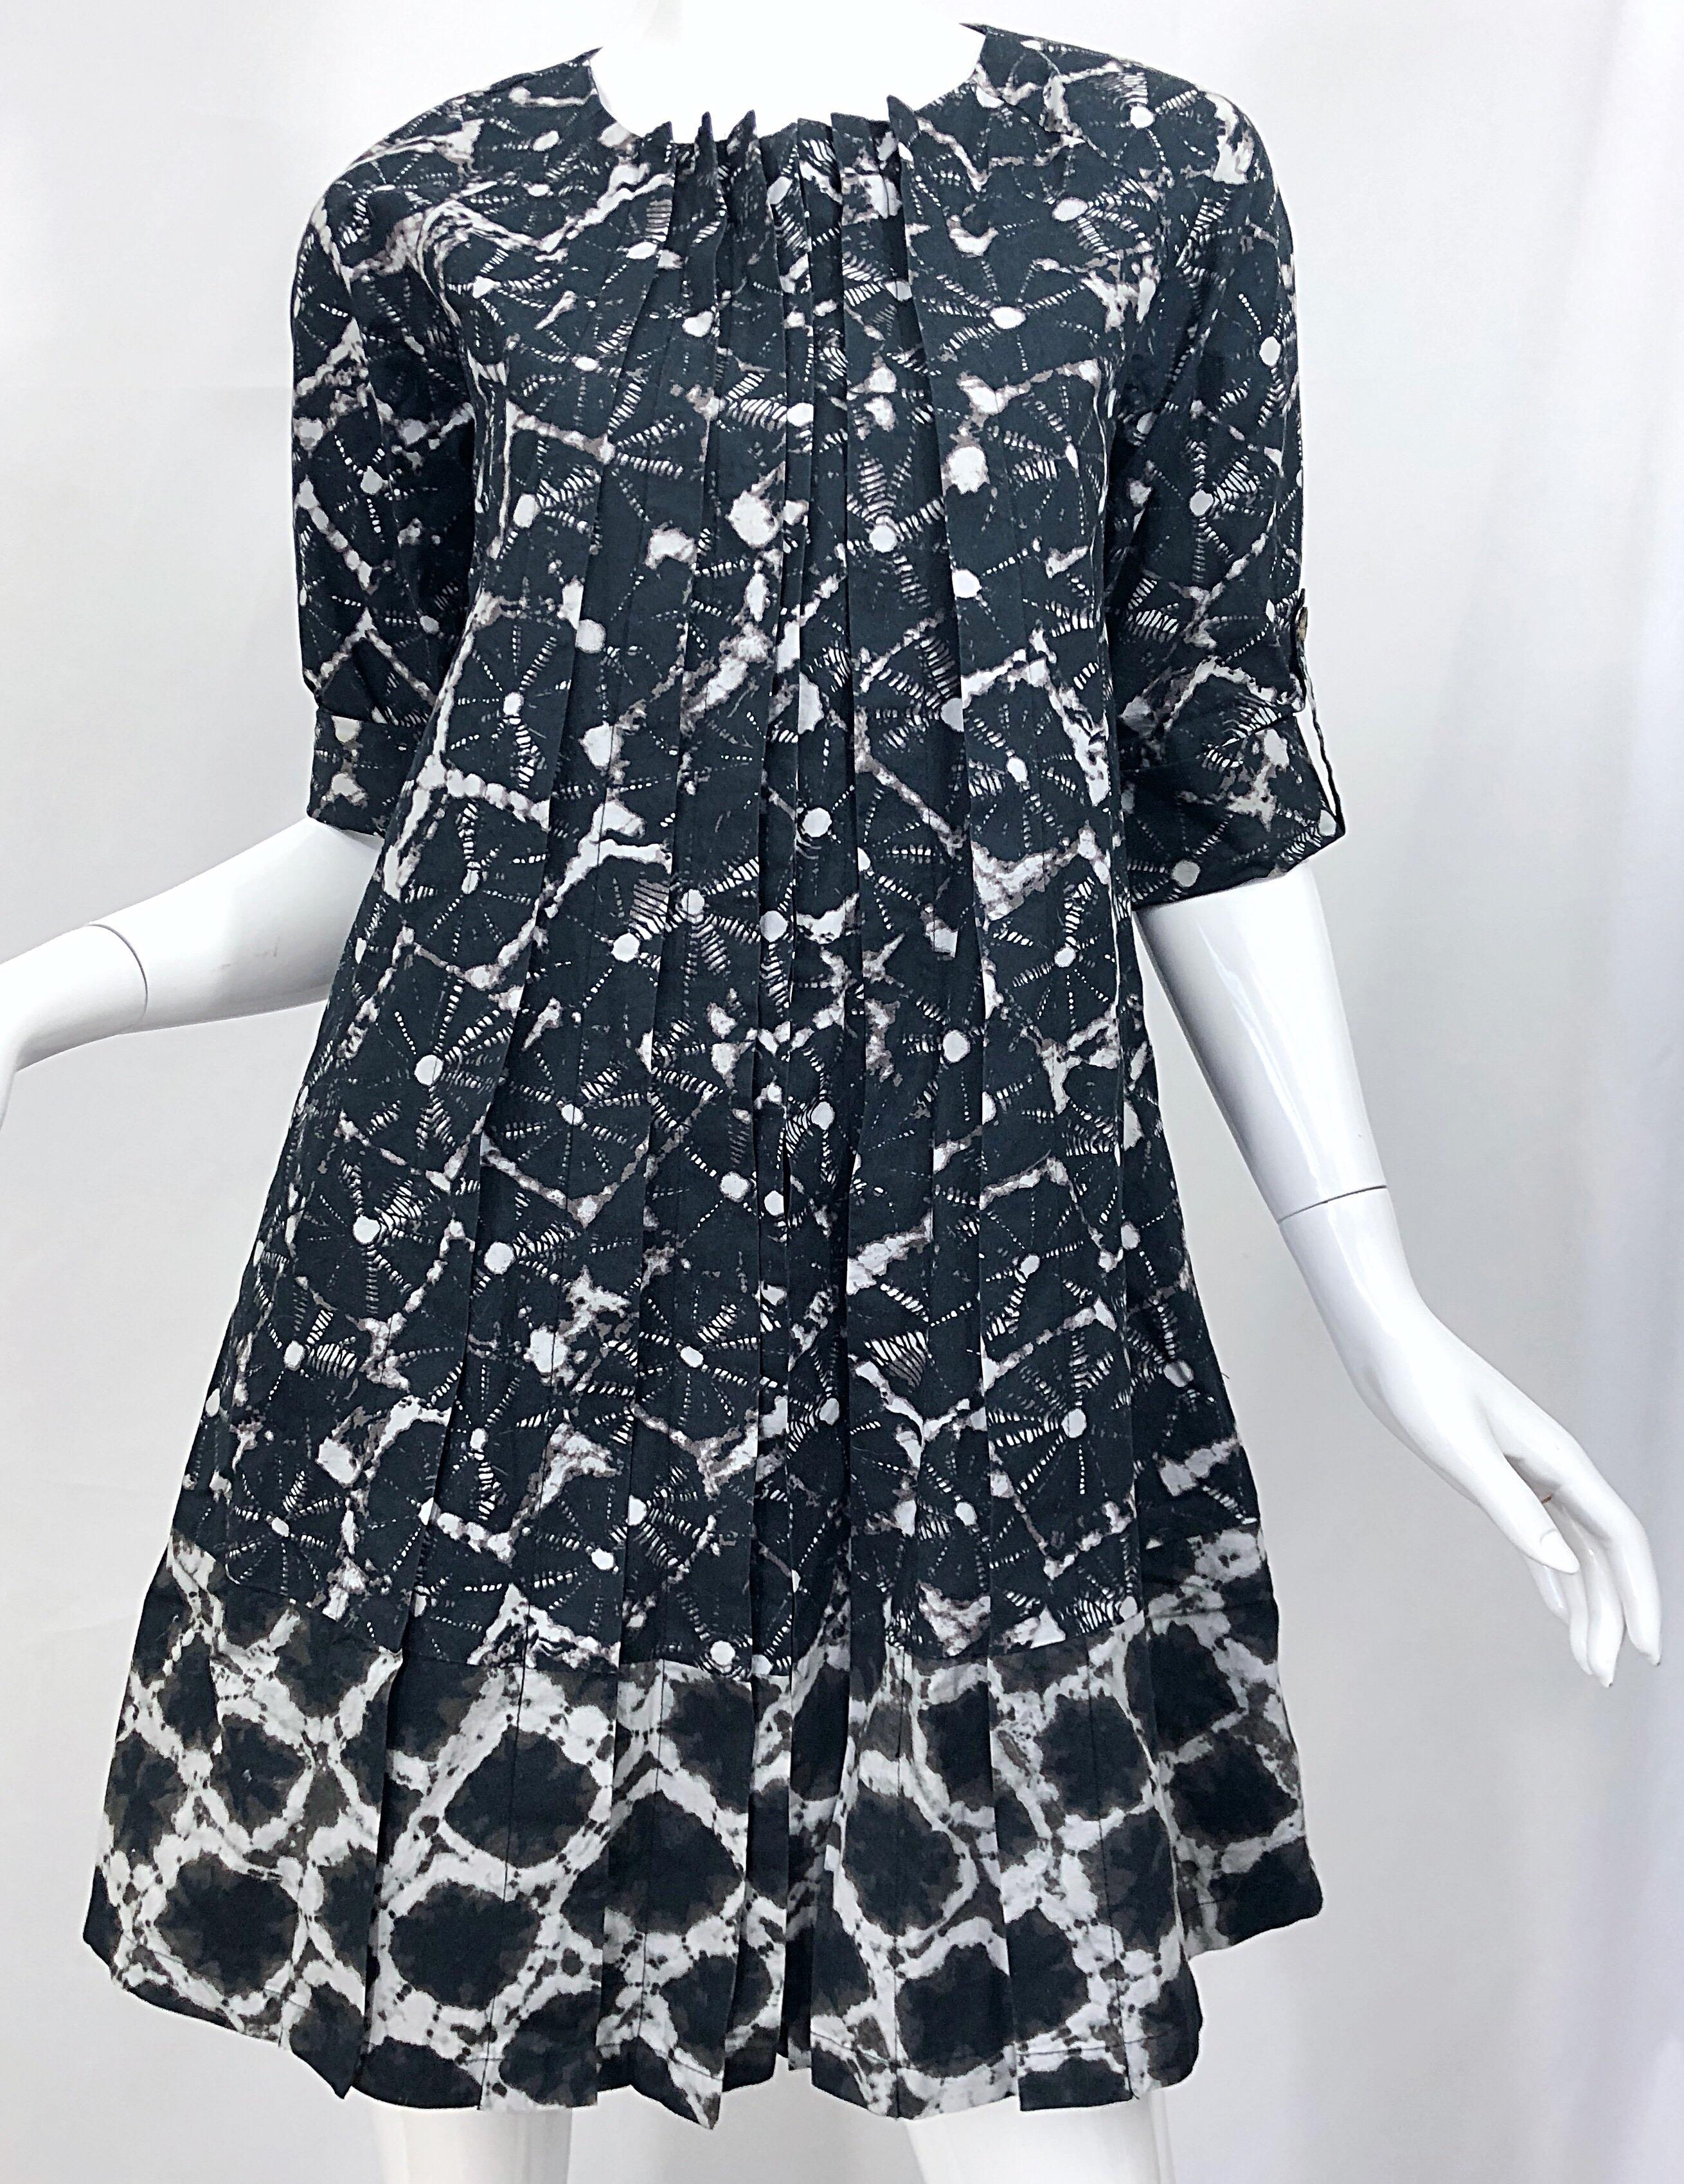 Thakoon Spring 2008 Black White Abstract Tie Dye Trapeze Swing Dress Jacket For Sale 4